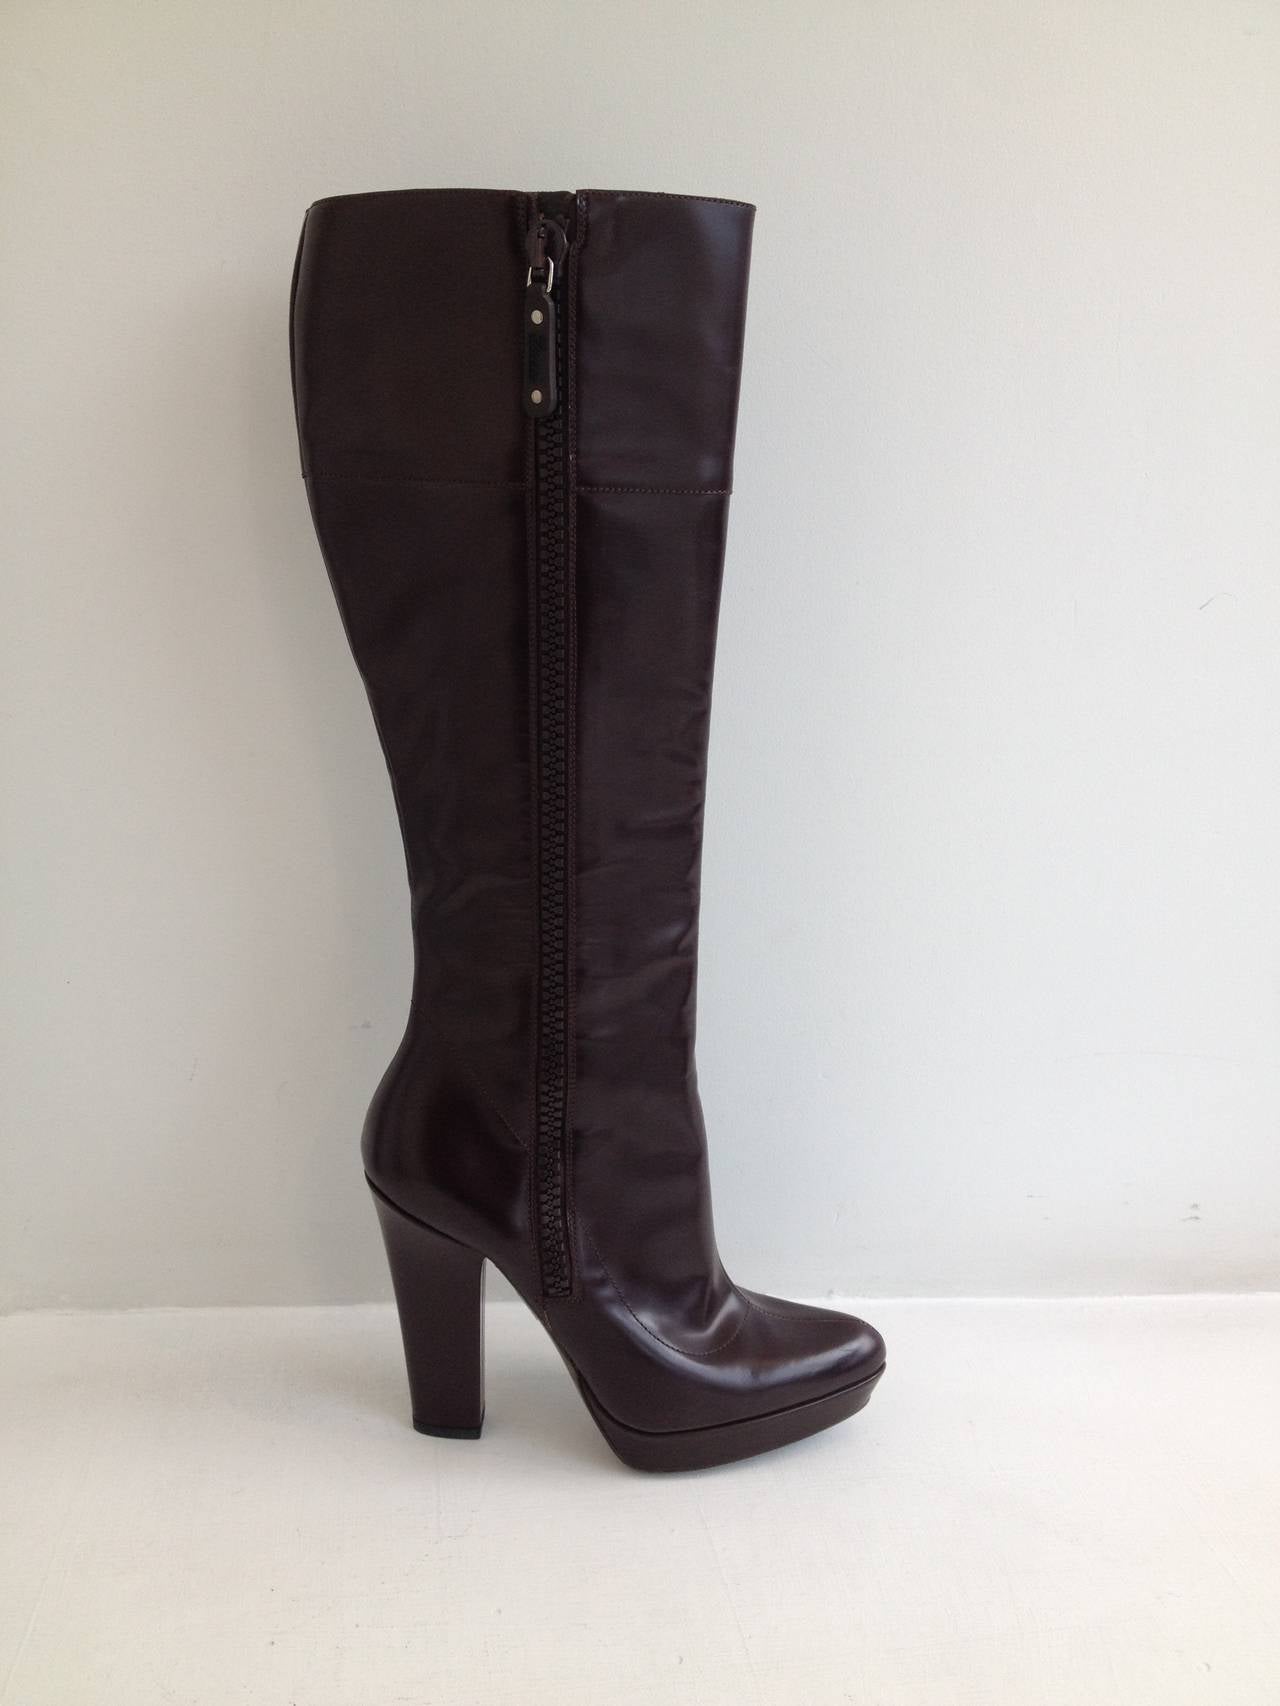 Who doesn't need a pair of flawlessly cut, expertly crafted Italian leather boots? Every fall and winter - whenever it's a little bit cold - you'll be thrilled to zip these boots up. They are a dark brown leather, warmer and softer than black, and